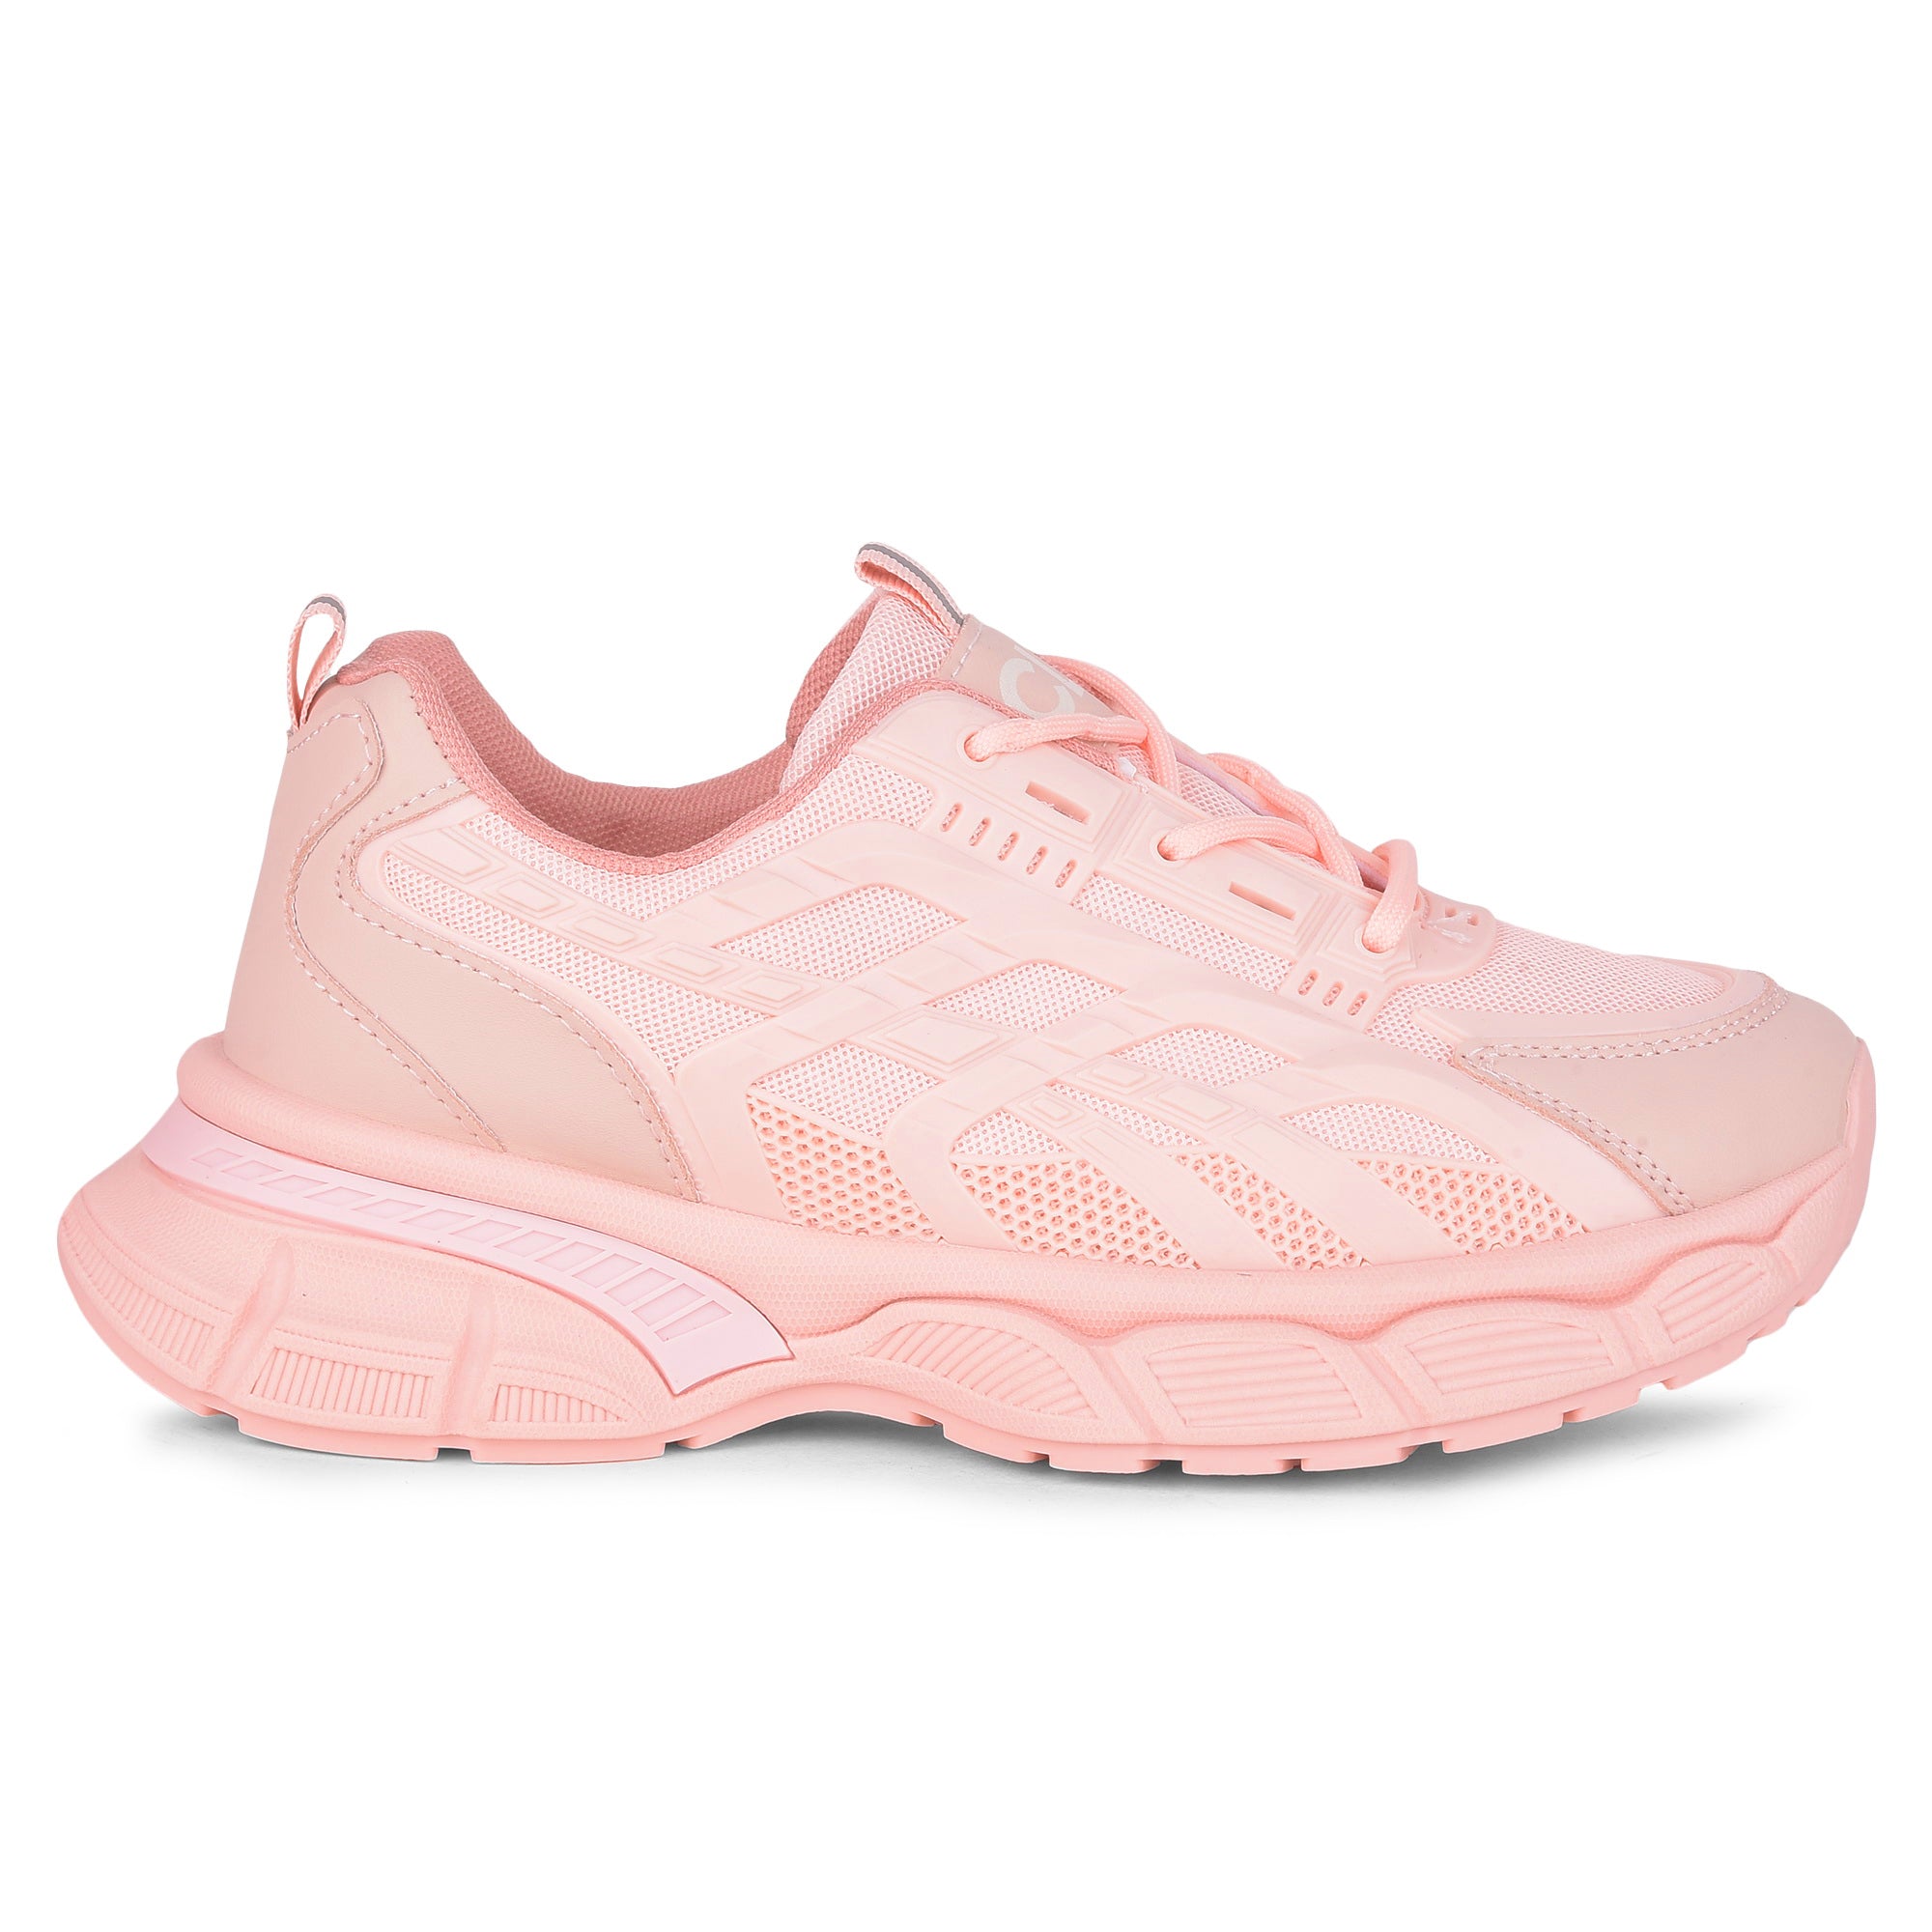 Calcetto LDS-034 Pink Women Casual Shoe